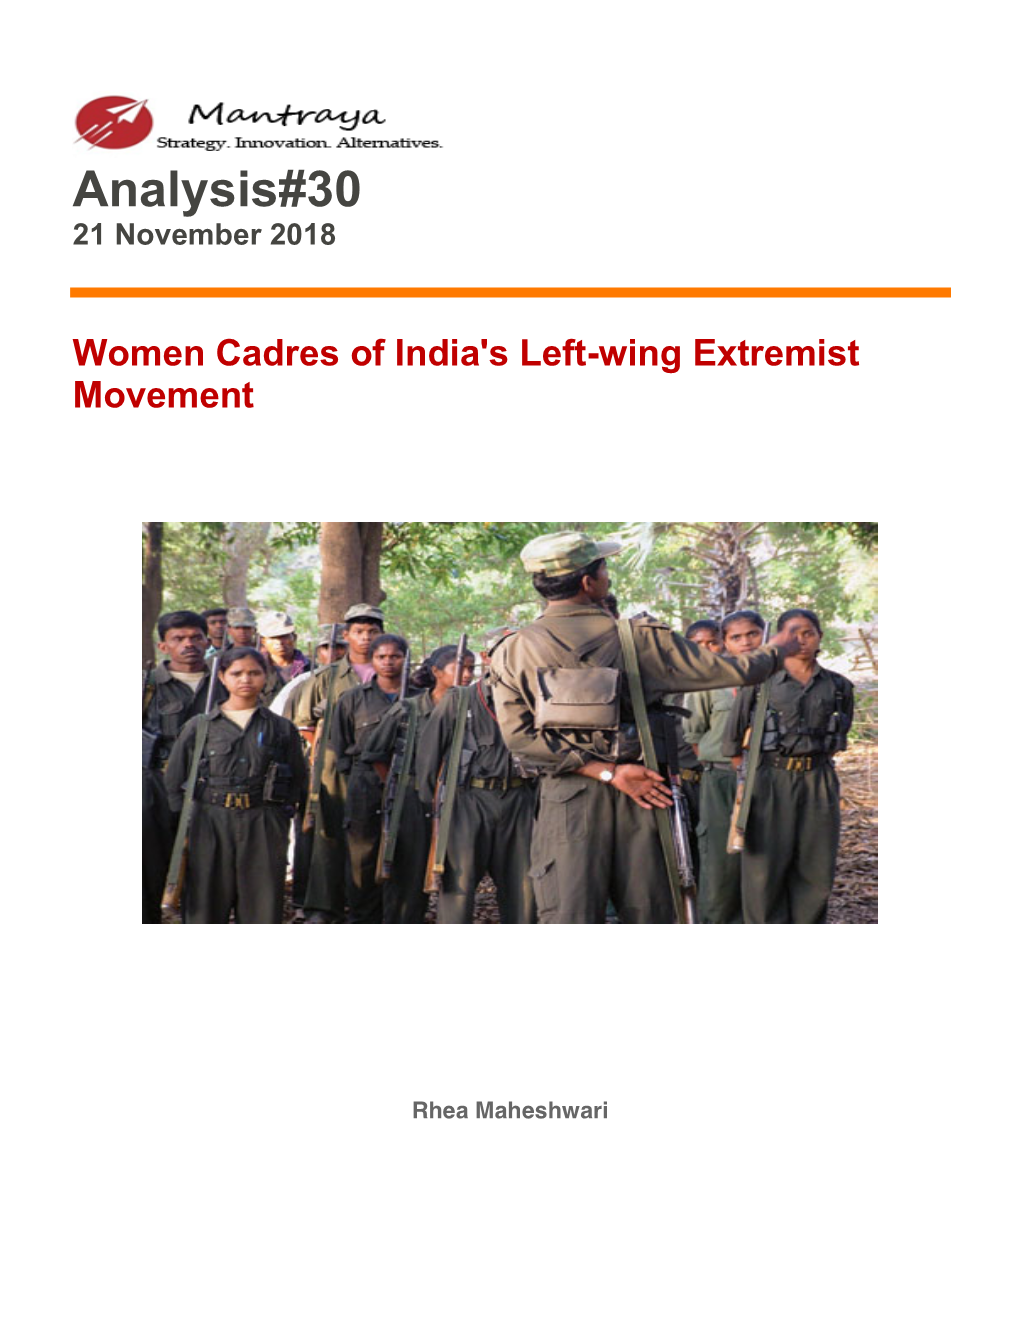 Women Cadres of India's Left Wing Extremism Movement